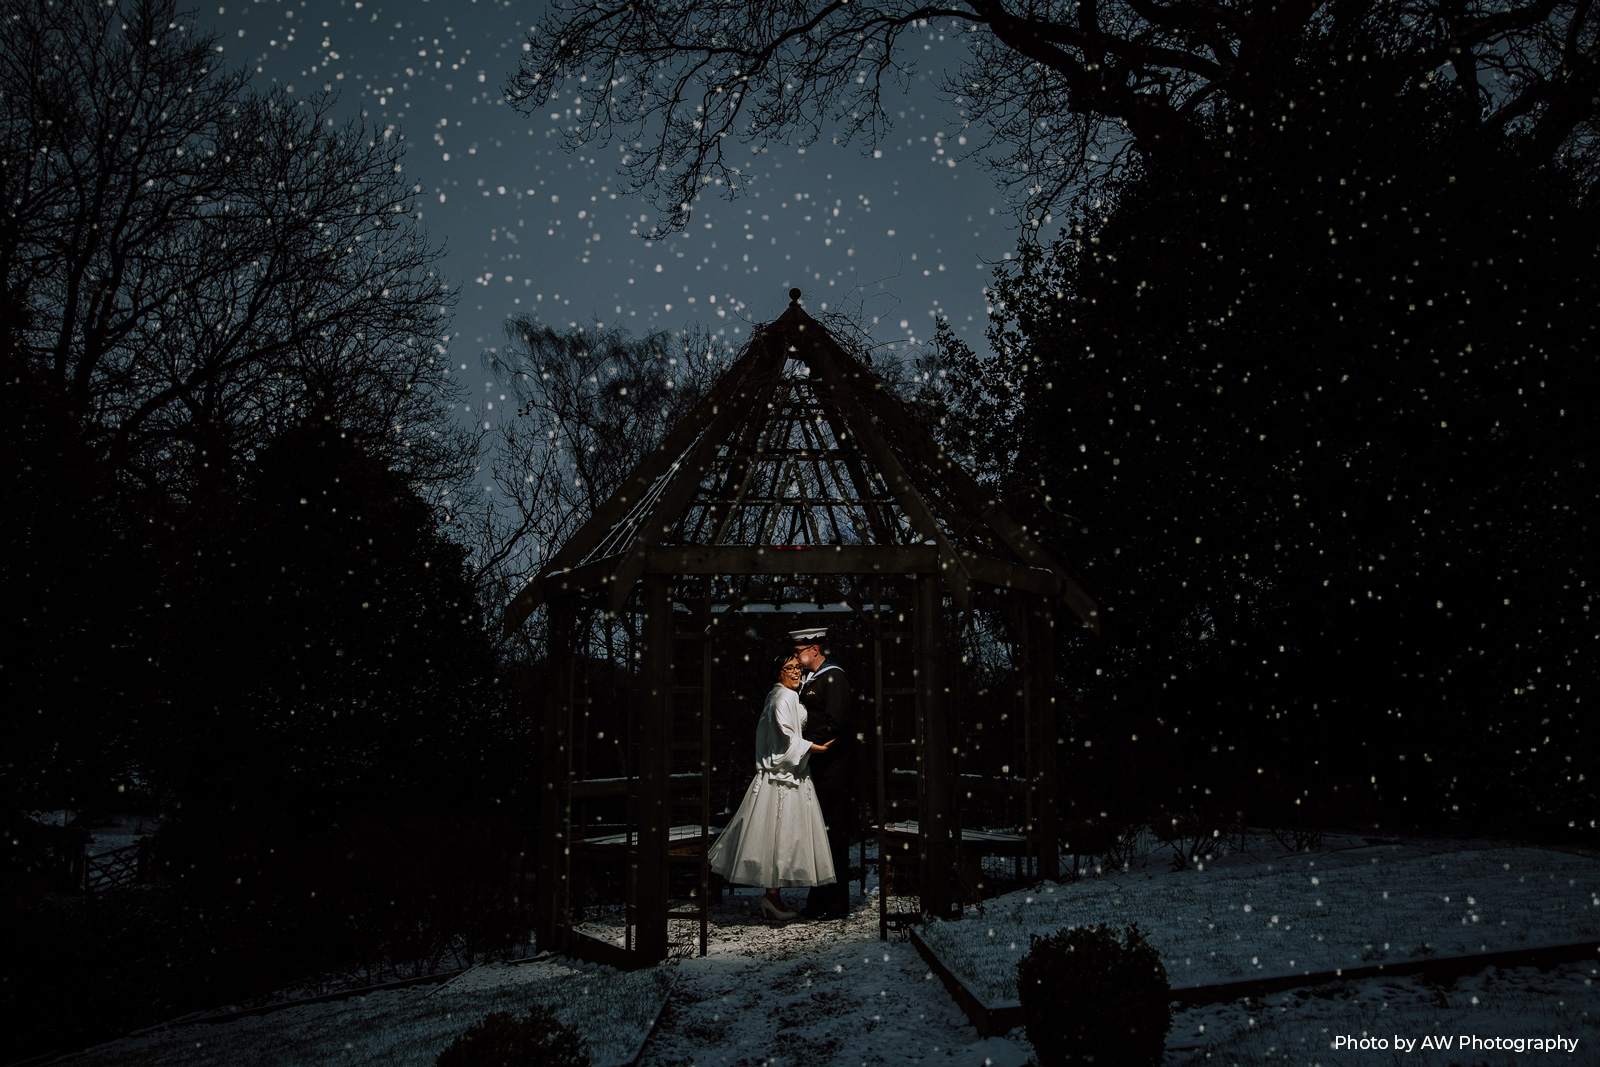 Danielle and Dan under the gazebo outside with snow. Photo by AW Photography/